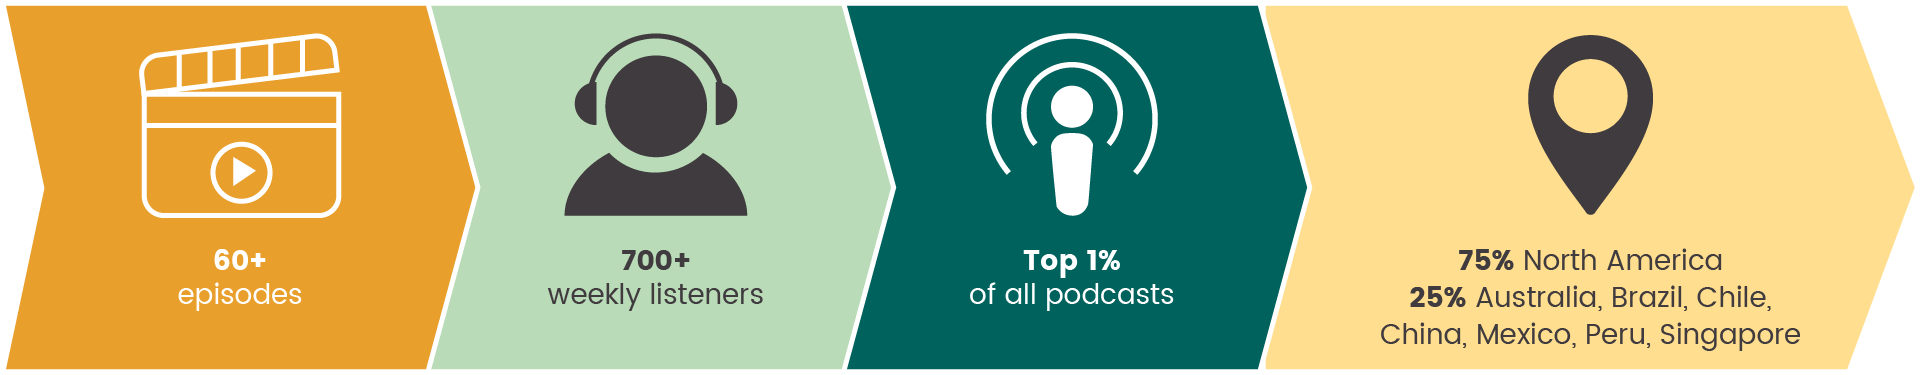 Infographic for IFPA Podcast showing: 60+ episodes, 700+ weekly listeners, Top 1% of all podcasts.